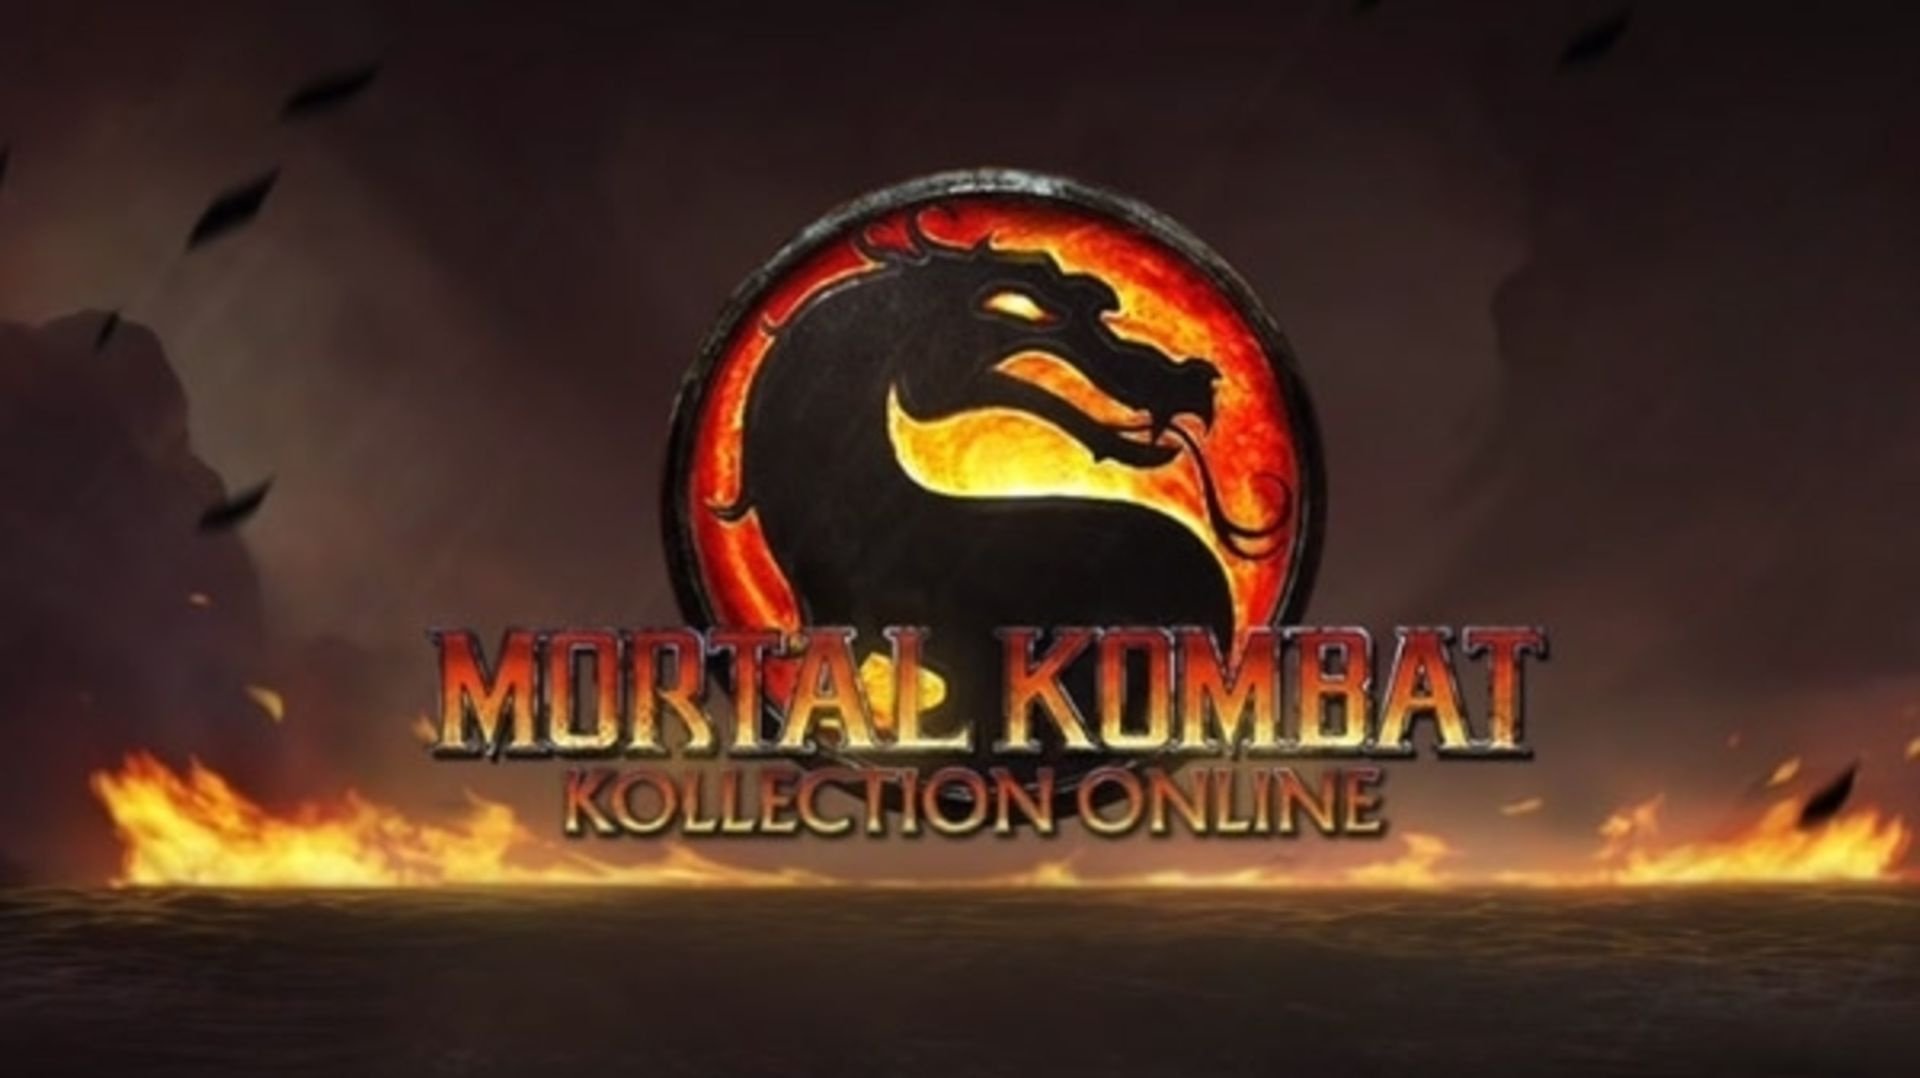 Is Mortal Kombat Kollection Online Bringing Retro Remasters to PS4